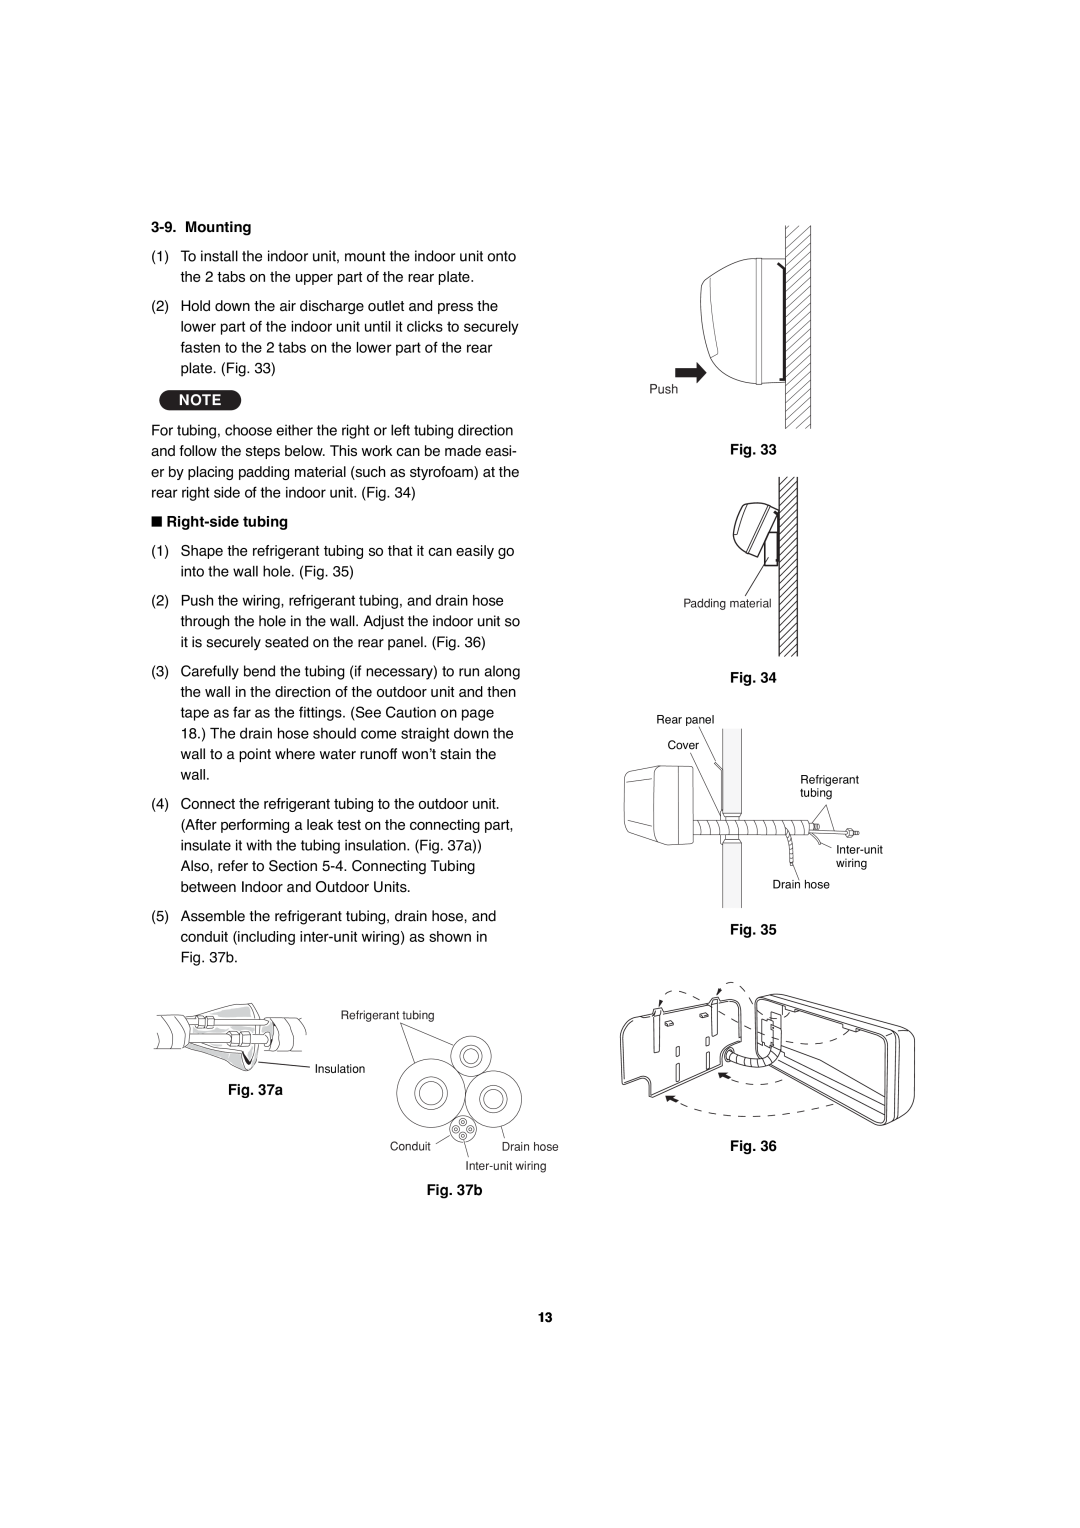 Sanyo CH1271, CH0971 service manual Mounting, Right-sidetubing, Fig. Fig, Push 